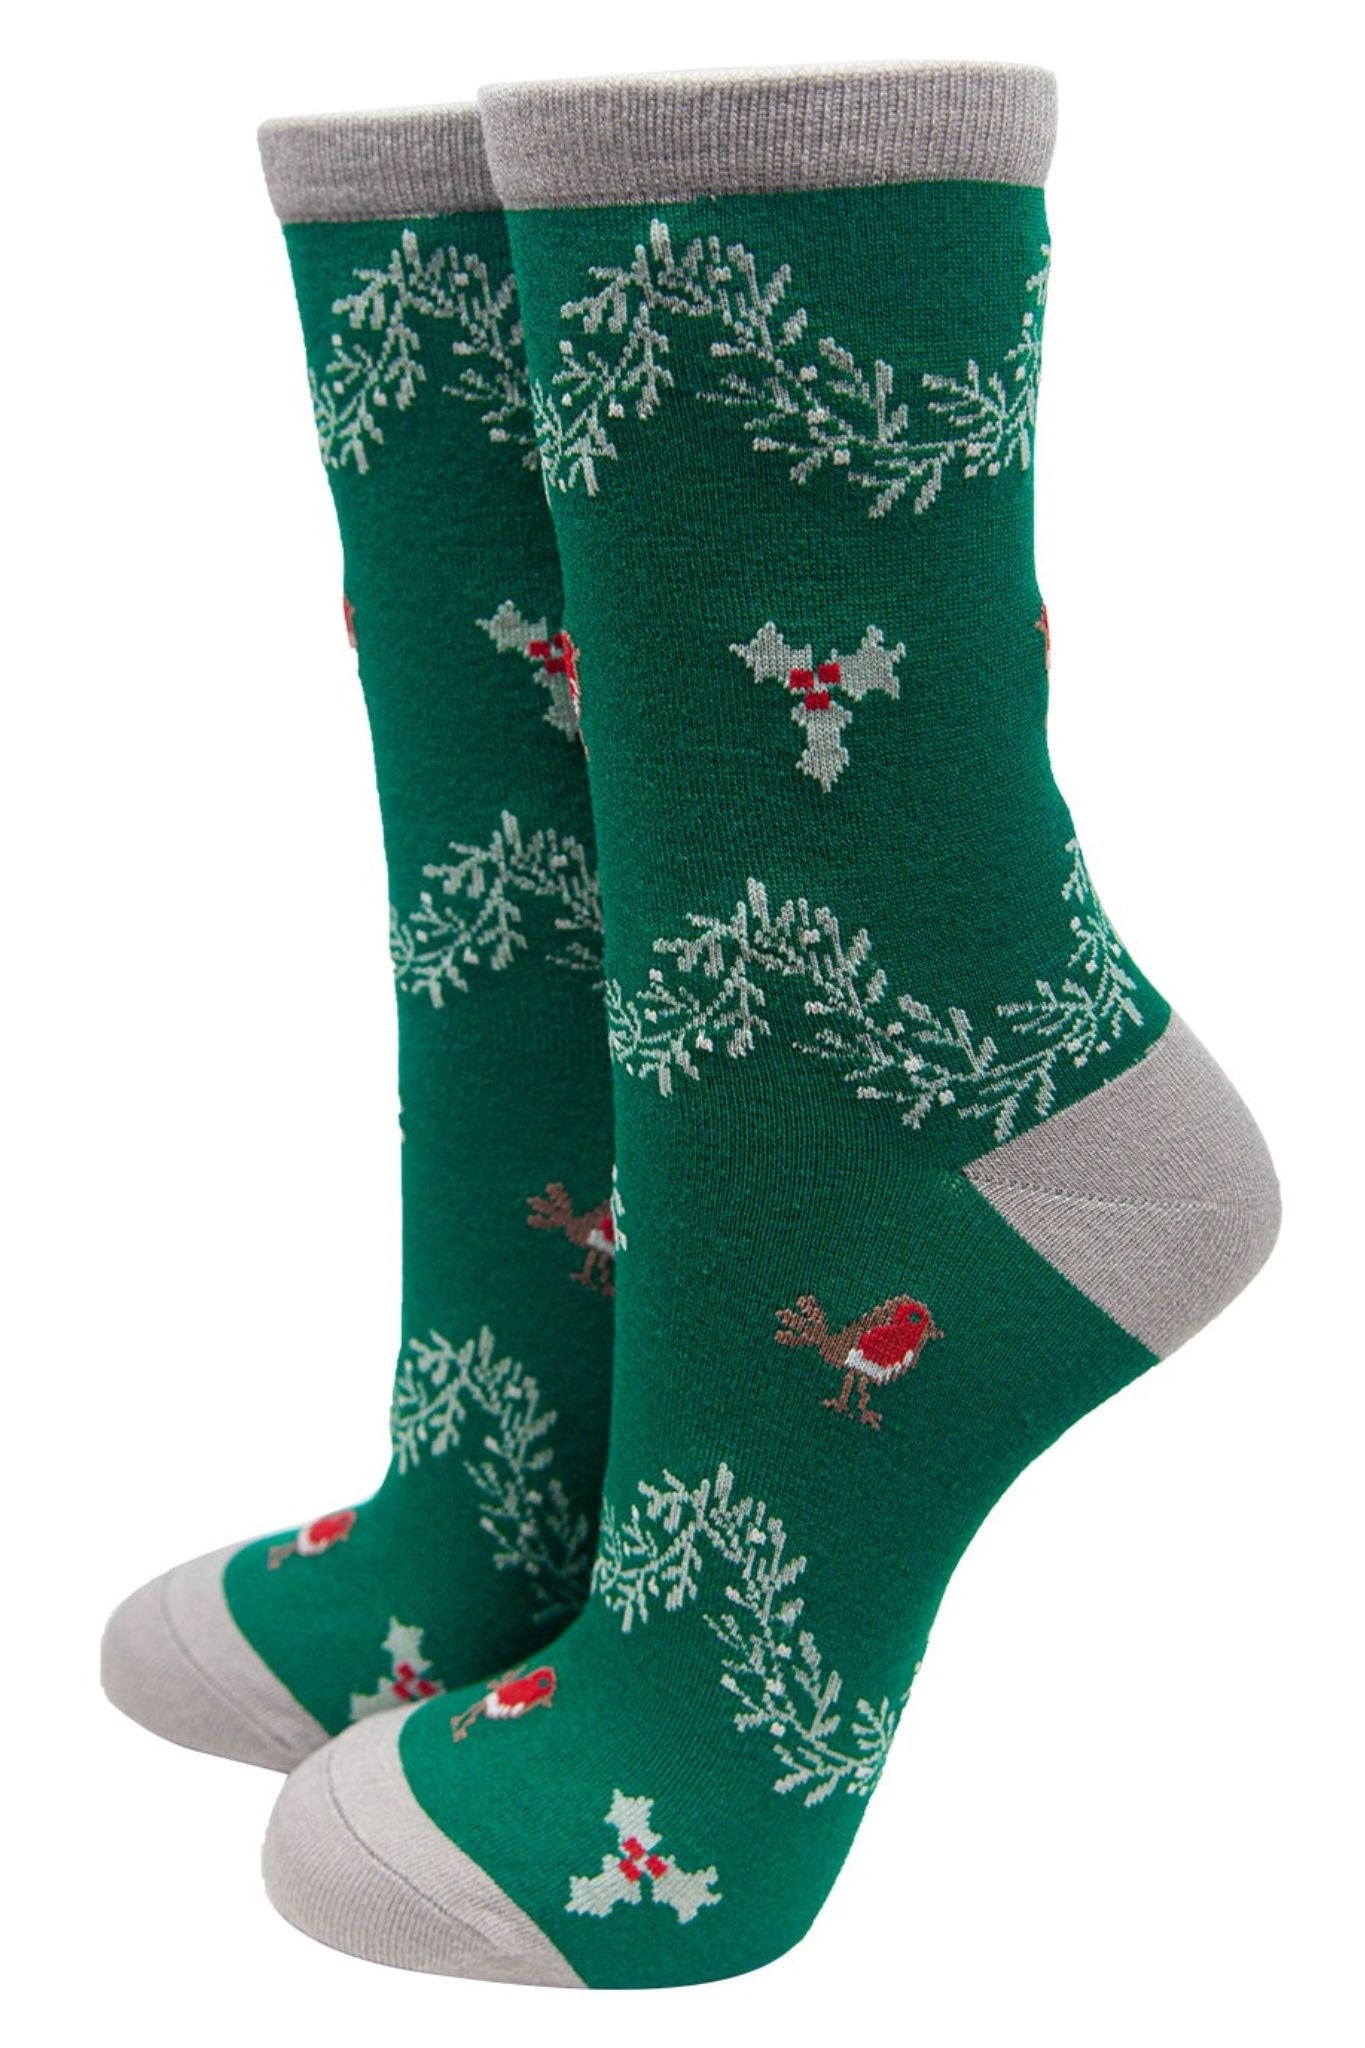 green bamboo socks with red robin birds and holly